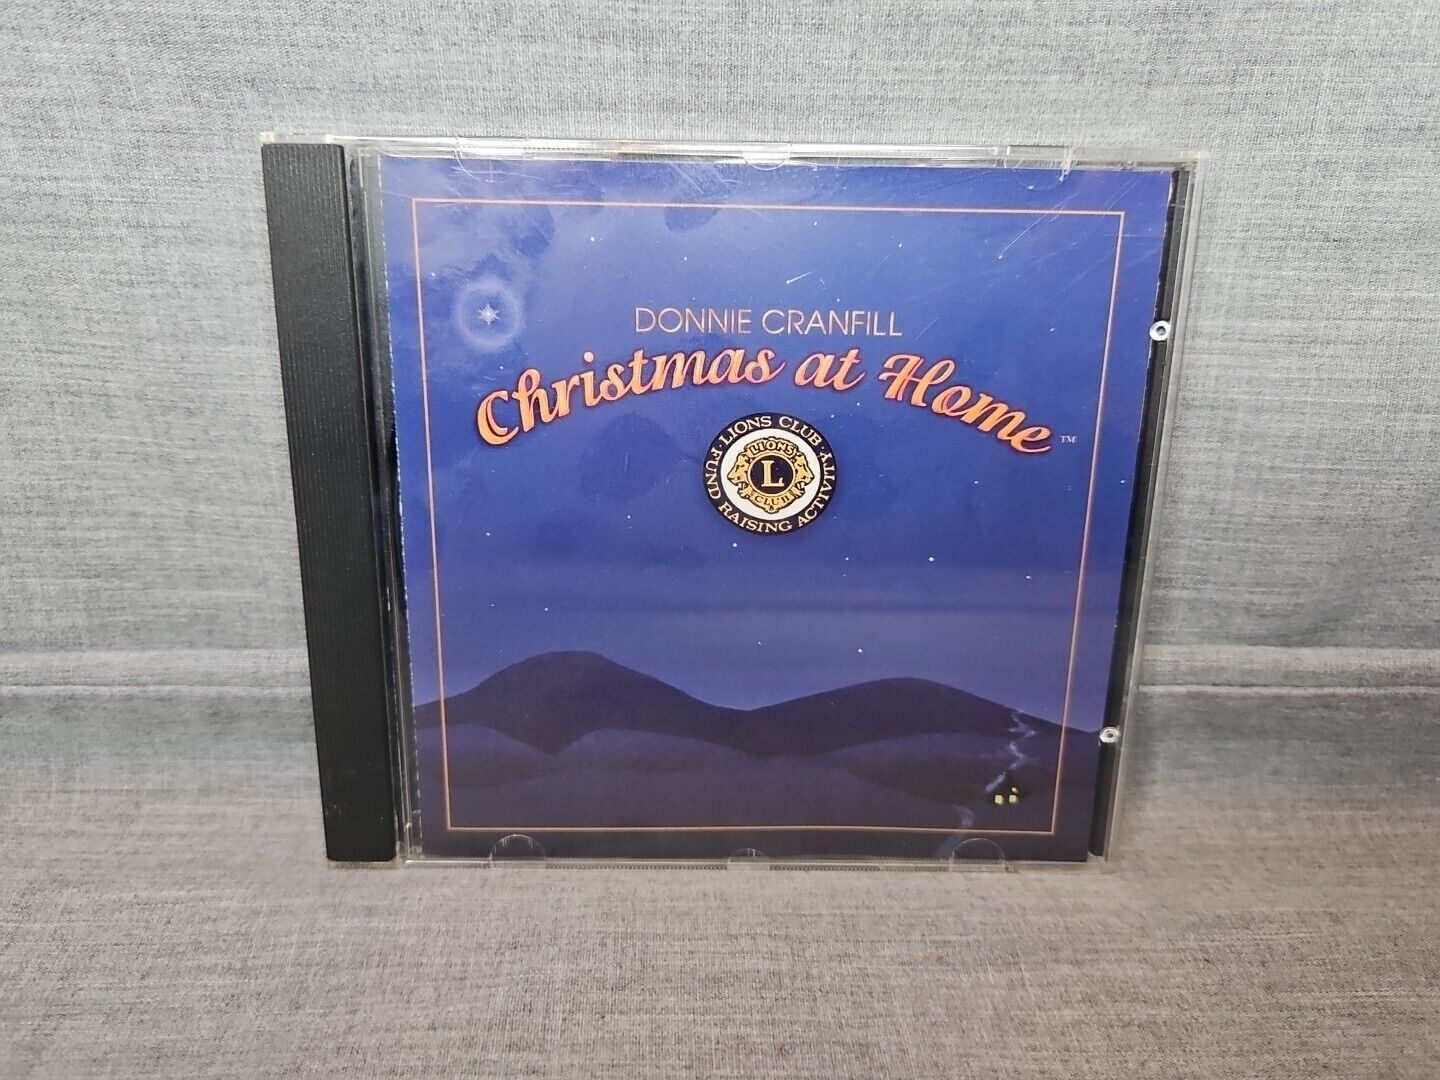 Donnie Cranfill - Christmas At Home (CD, 1995, Soundtastic)